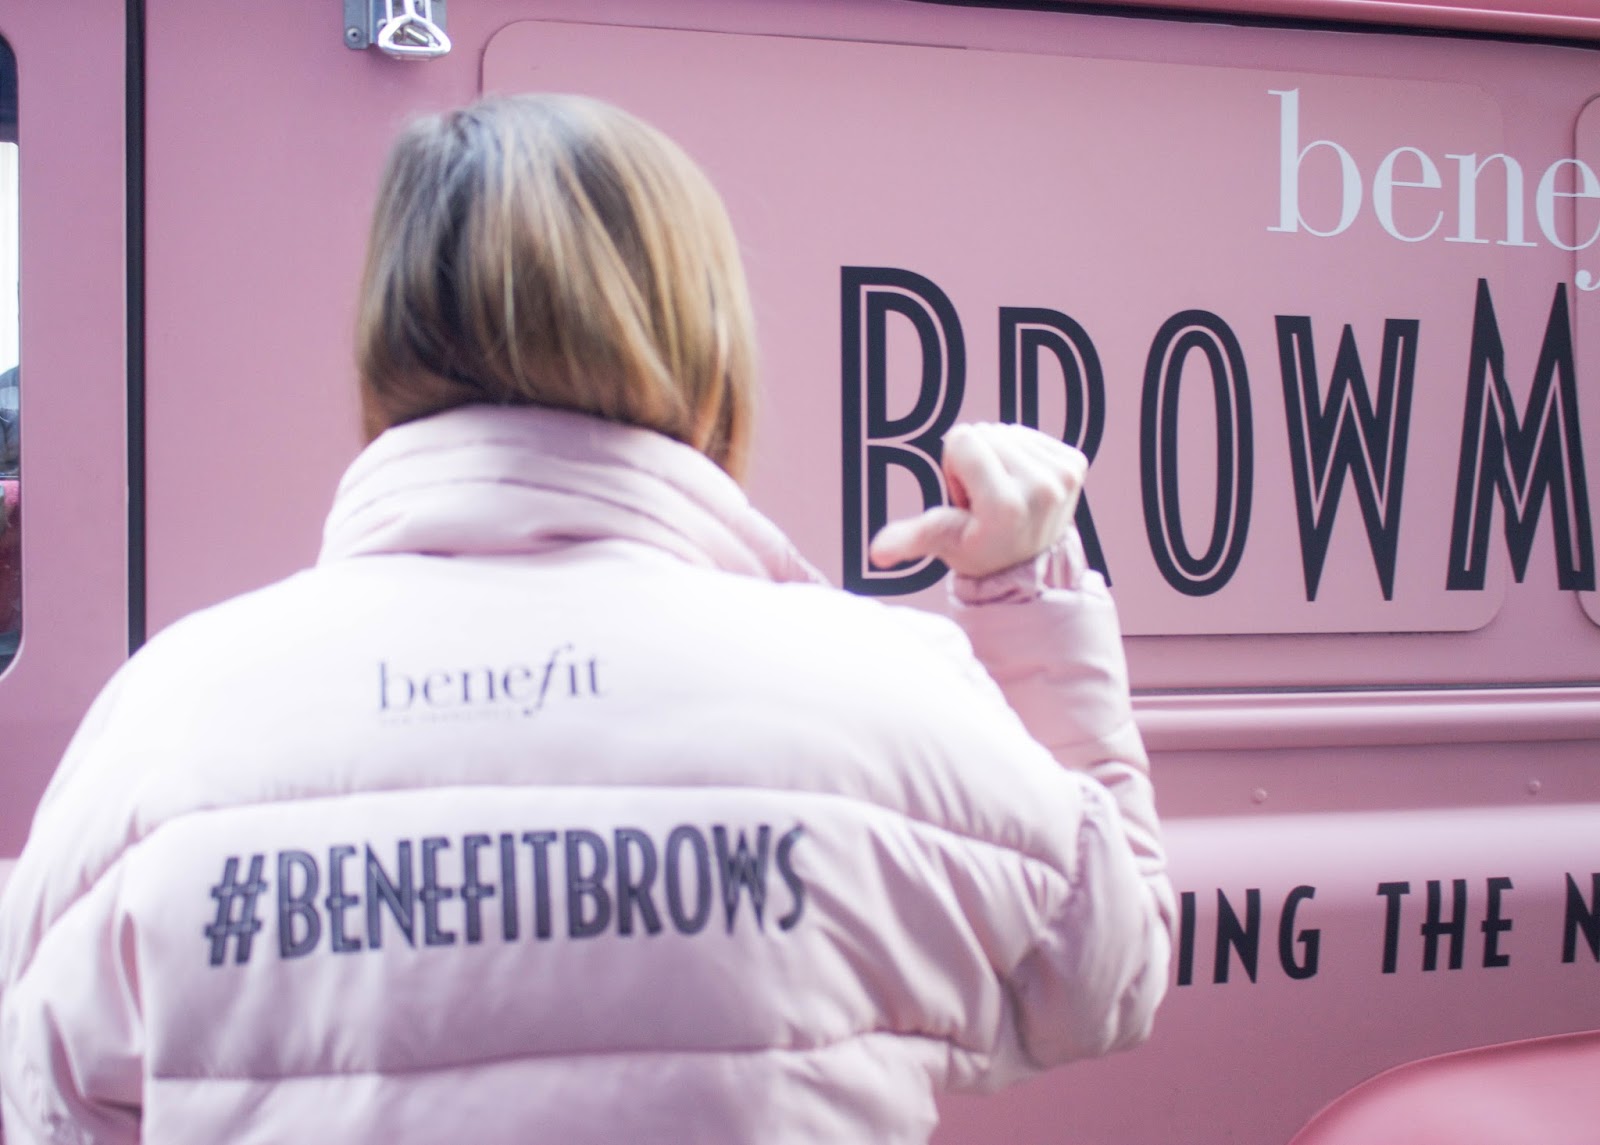 #BenefitBrows